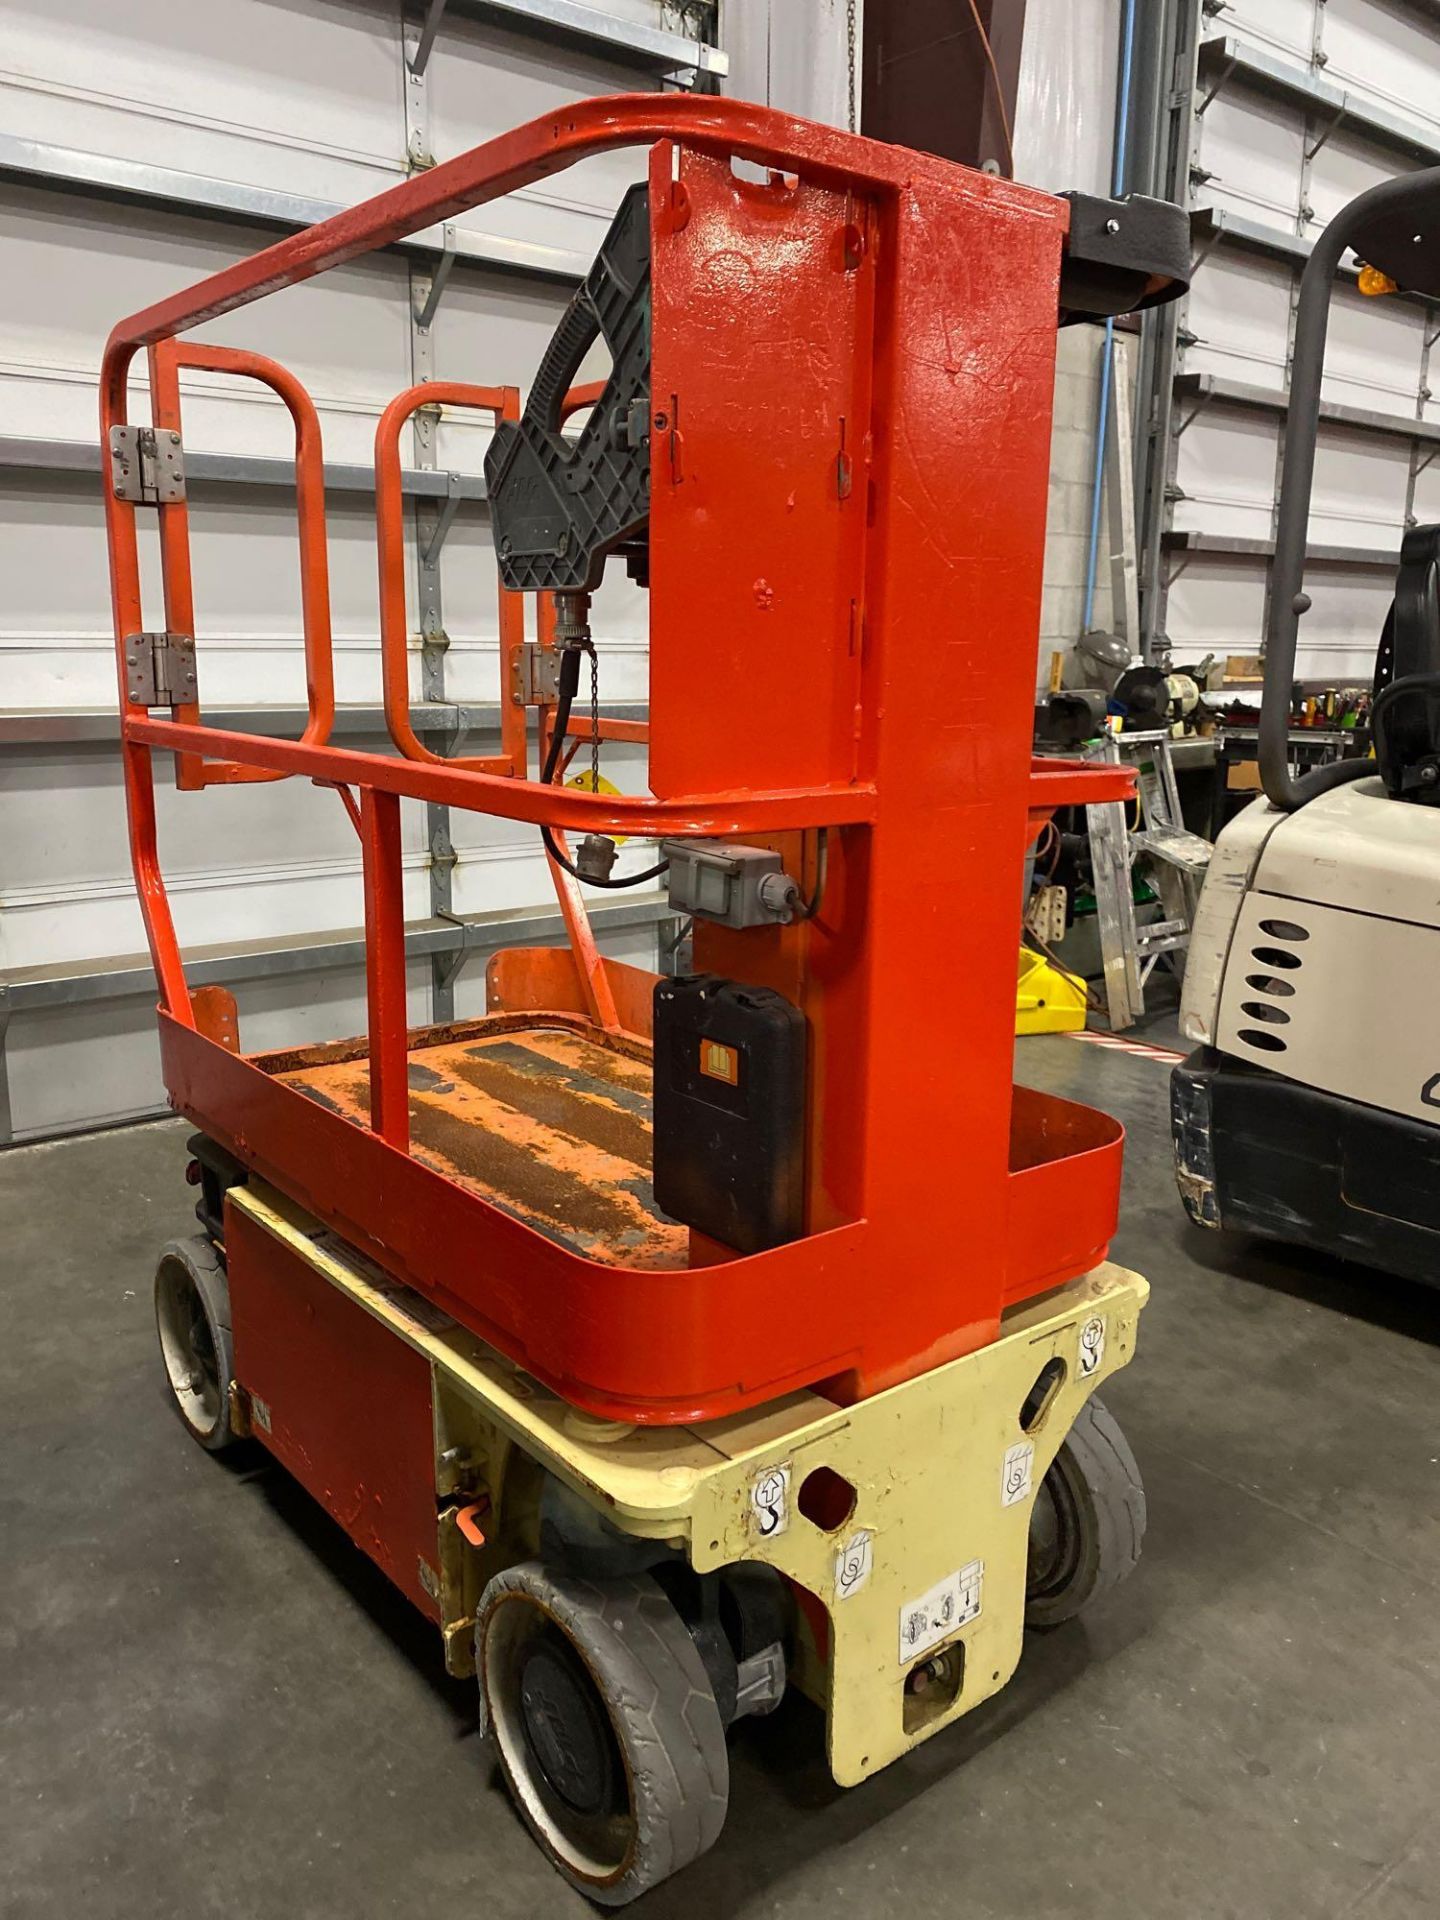 JLG 1230ES ELECTRIC MAN LIFT, SELF PROPELLED, BUILT IN BATTERY CHARGER, 12' PLATFORM HEIGHT, 444 HOU - Image 3 of 6